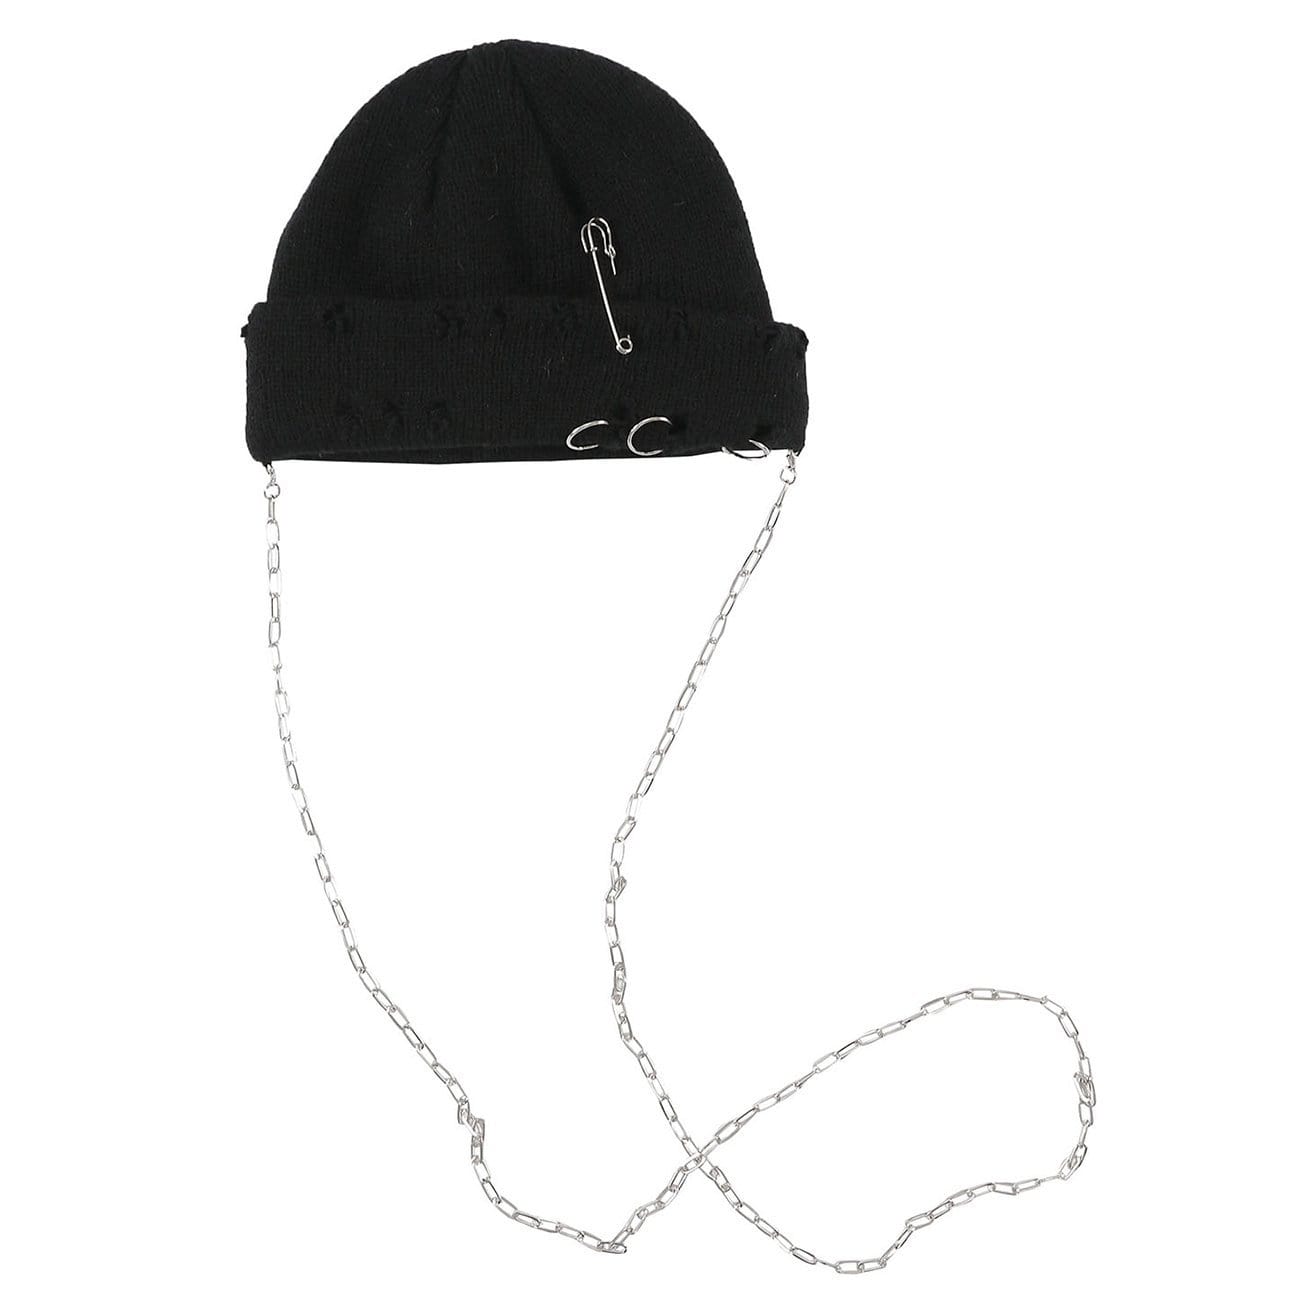 Vintage Ripped Hole Chain Knit Cap